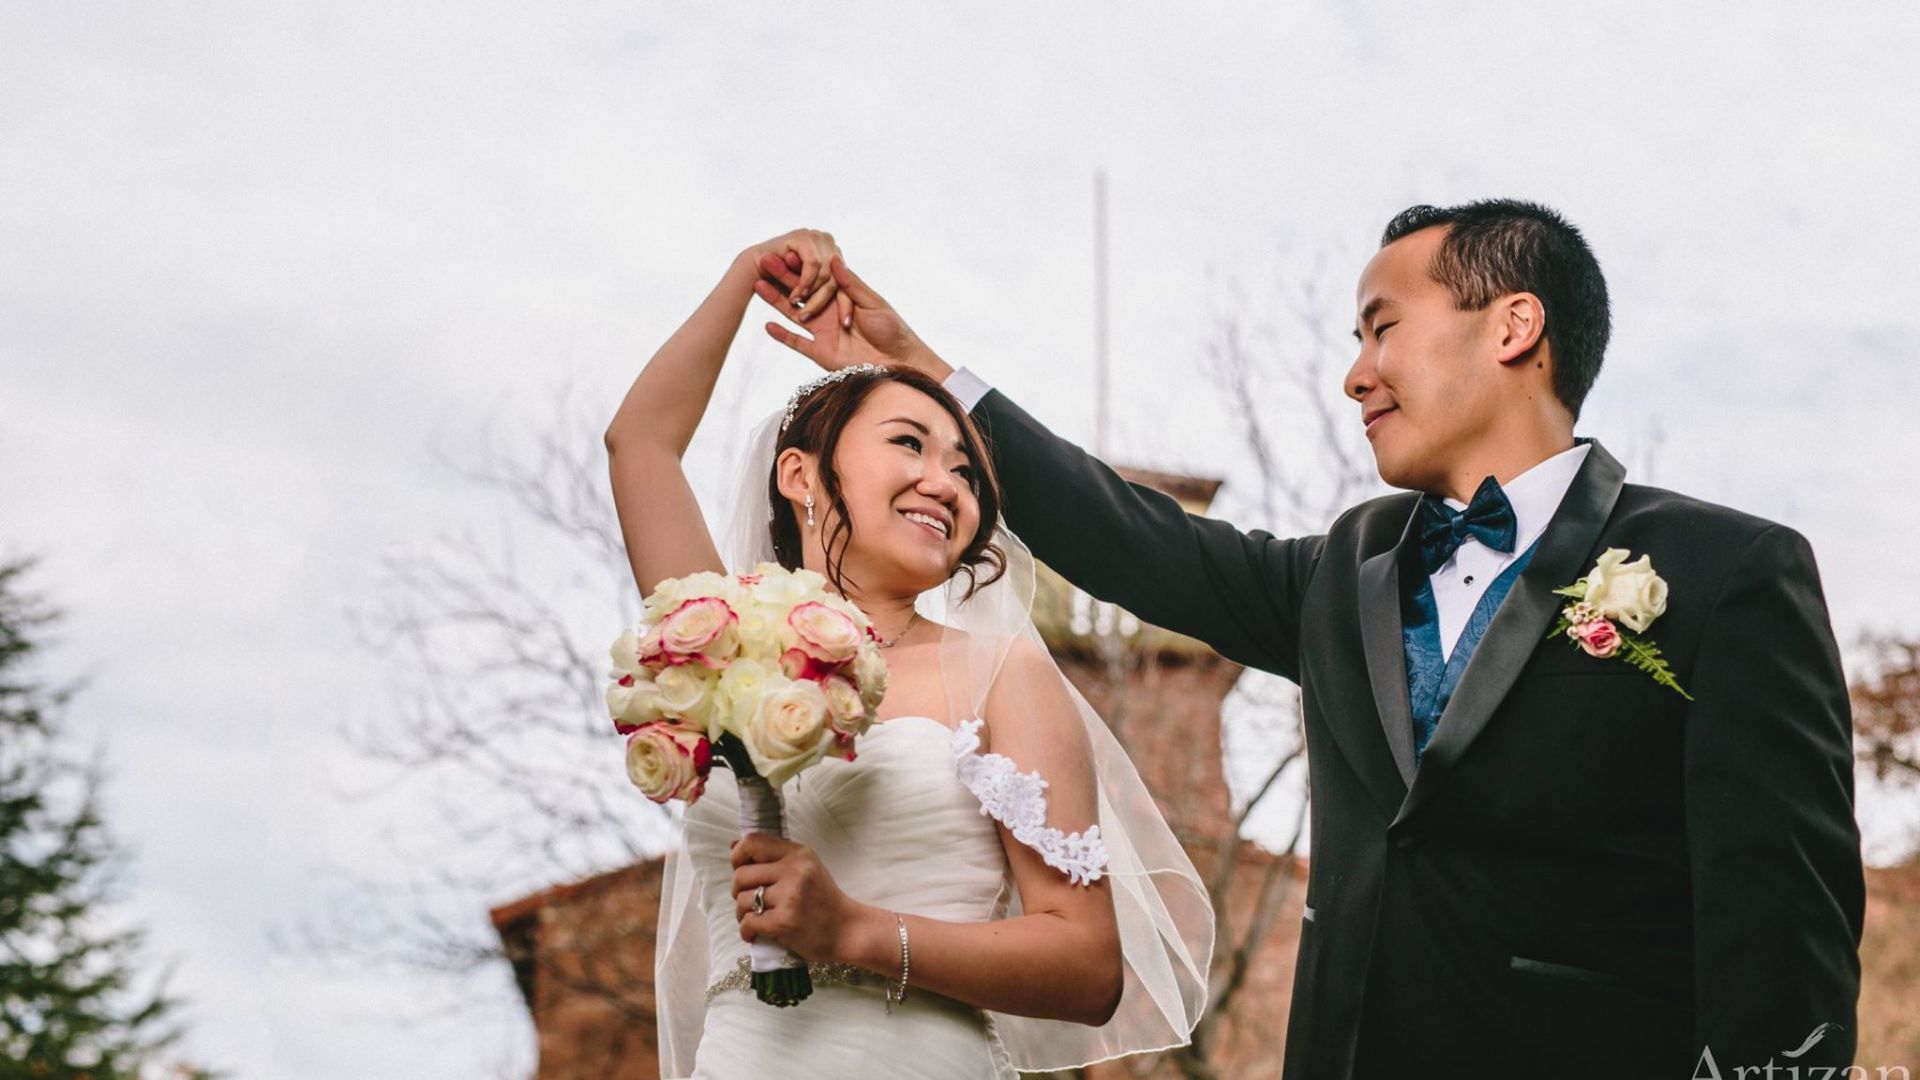 Bride and groom celebrating at Paso Robles Inn wedding venue